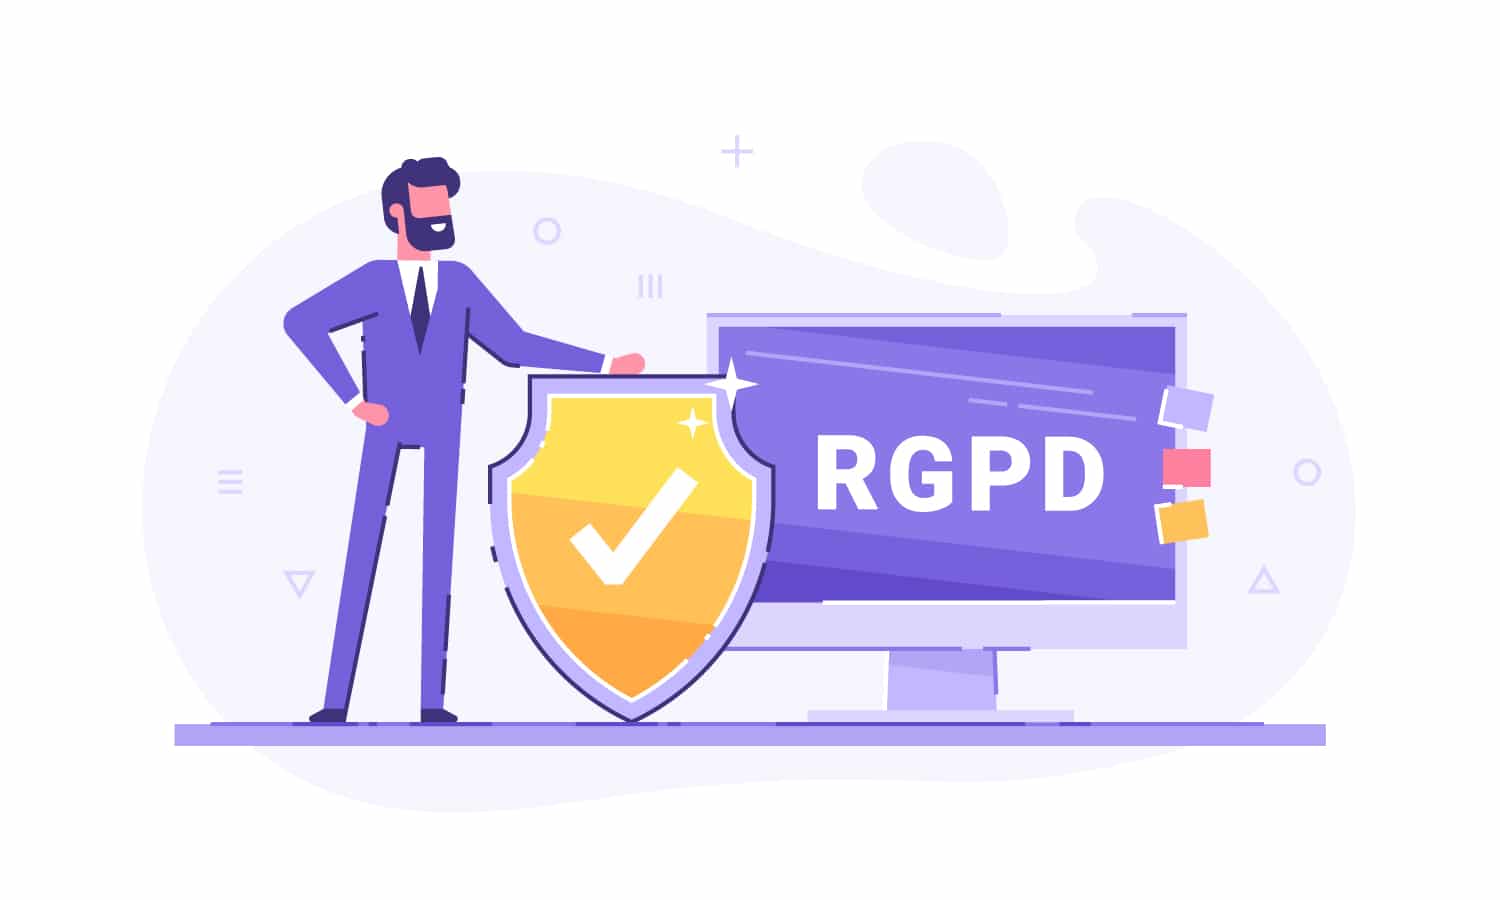 Email RGPD